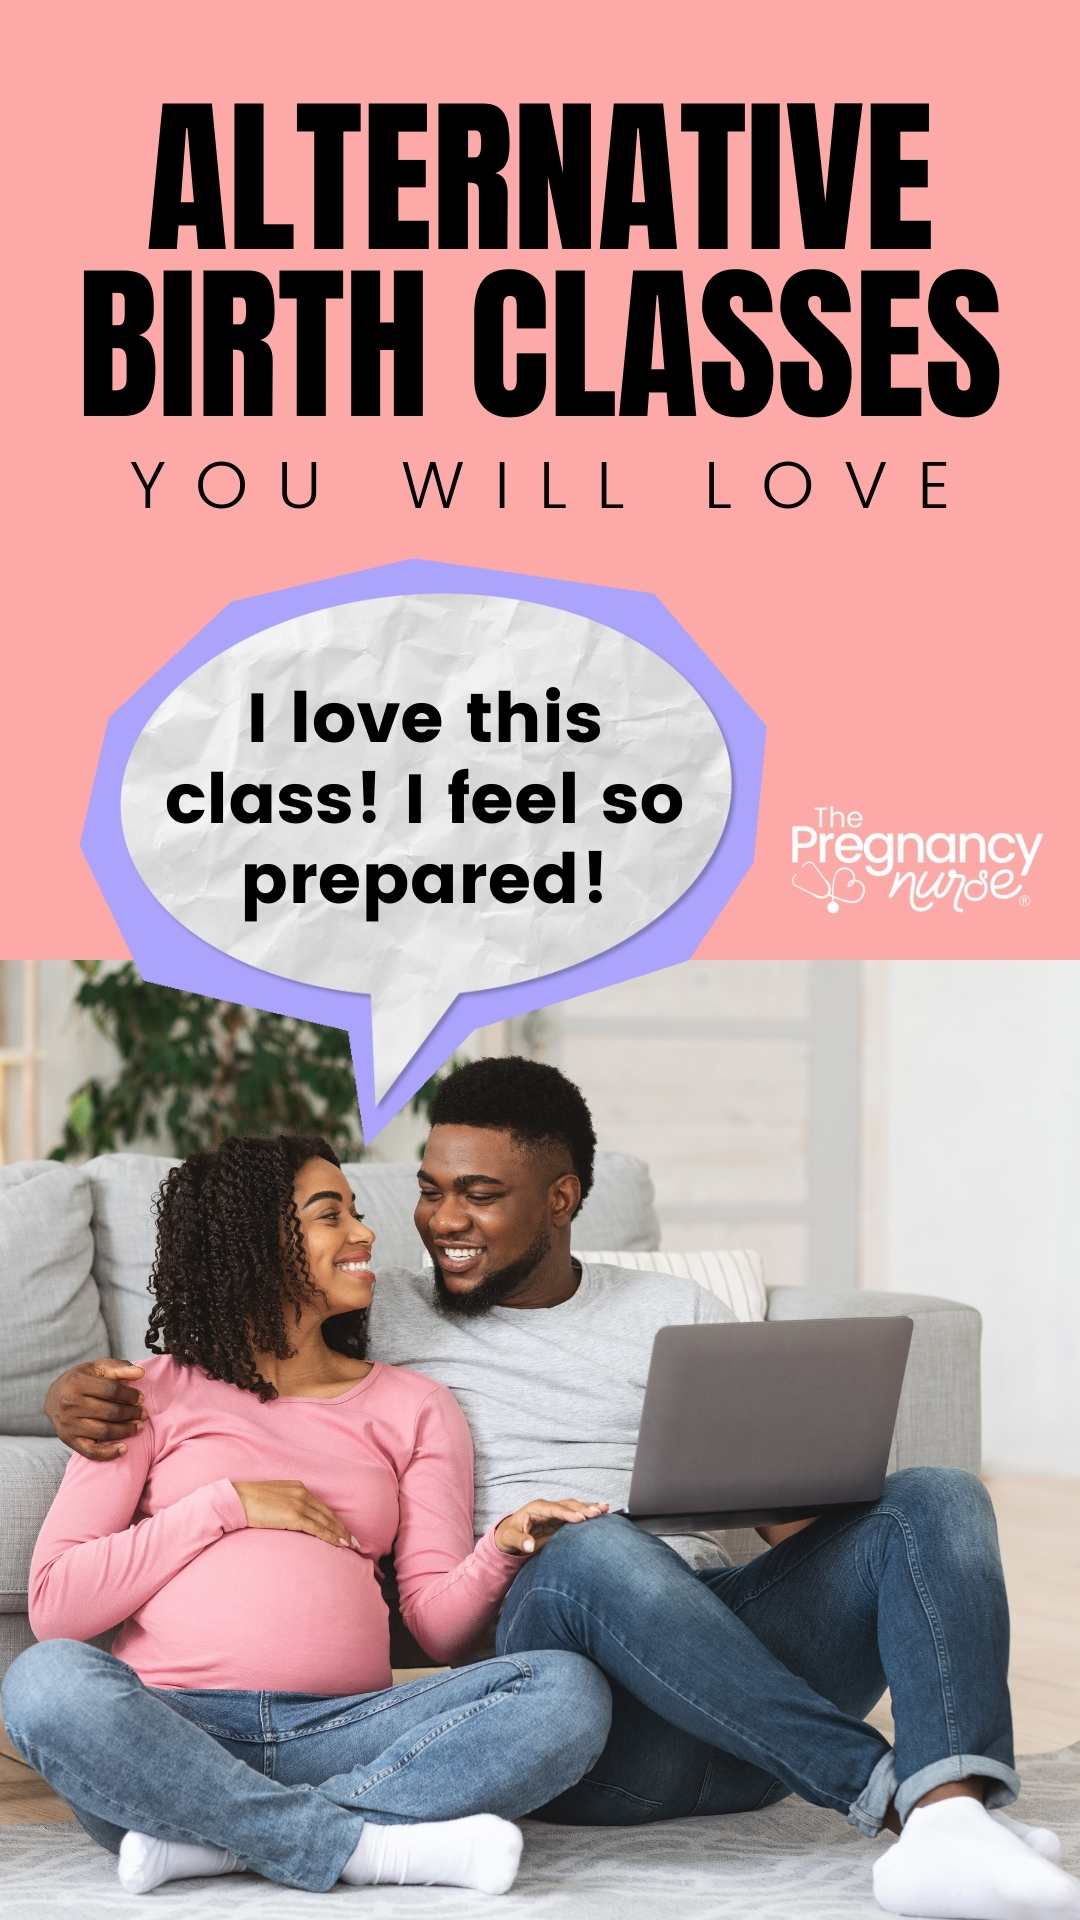 There are a lot of great online classes for new parents, but if Tinyhood doesn't work for you, don't worry. Here are some great alternatives that will prepare you for your new life. From affordable pricing to comprehensive courses, there's something for everyone!